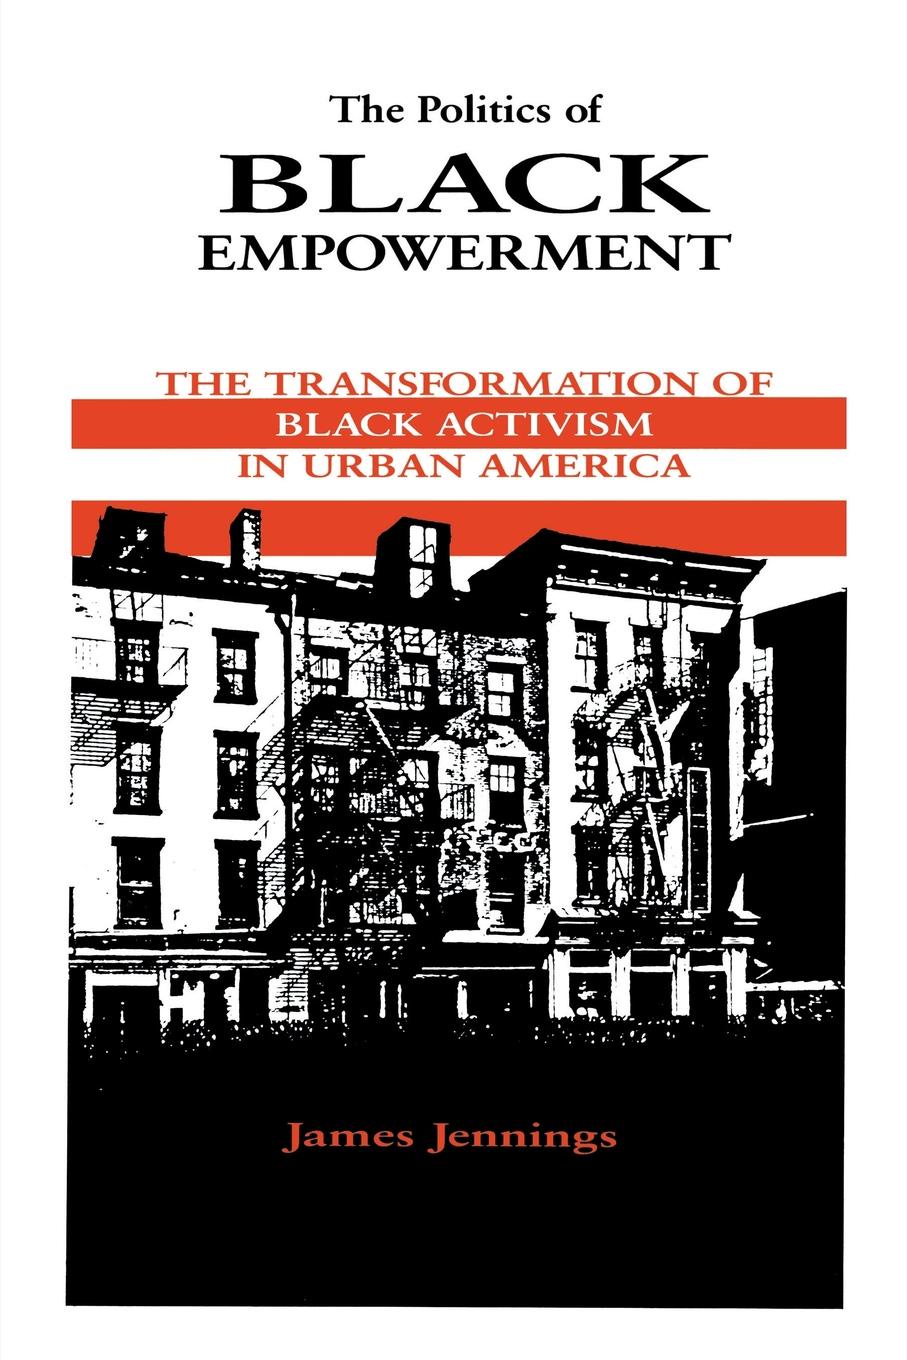 The Politics of Black Empowerment. The Transformation of Black Activism in Urban America